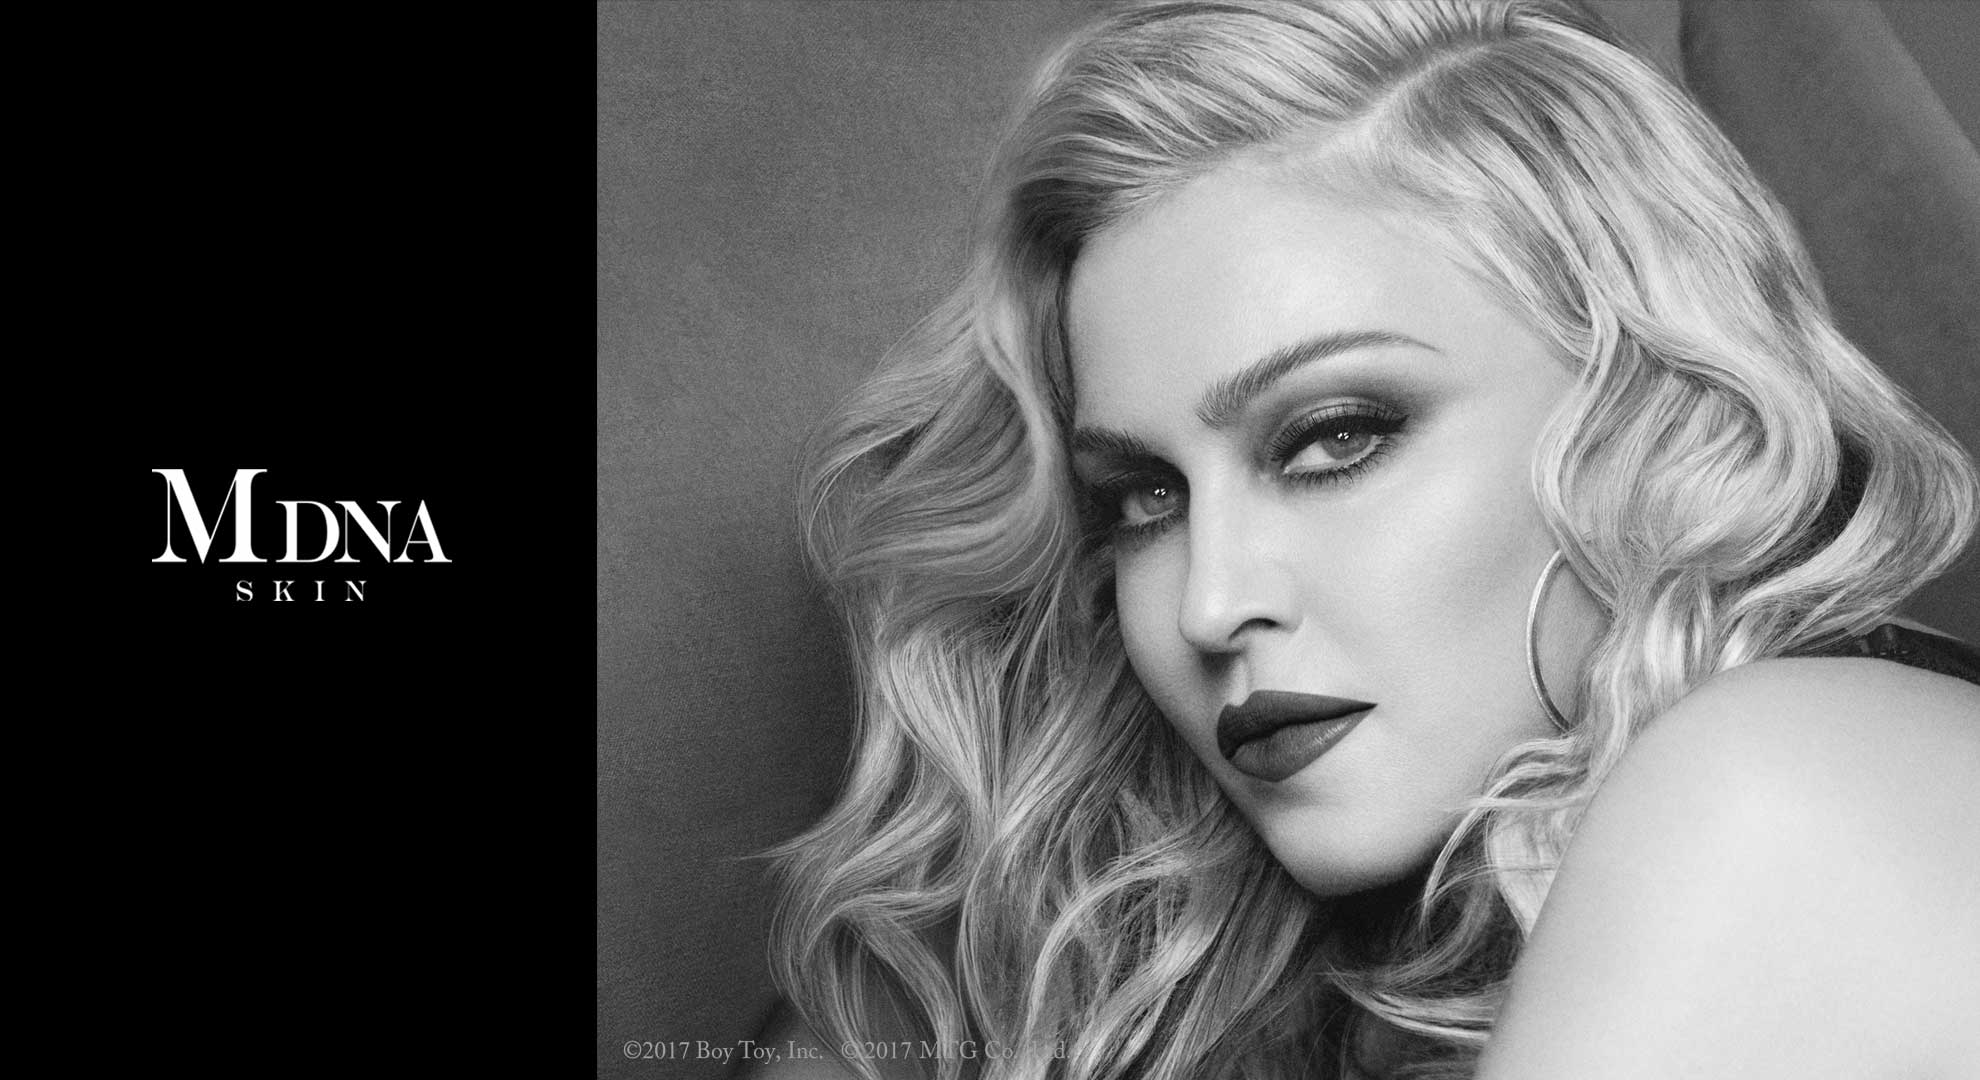 MDNA SKIN, a holy grail for your skin - The Chic Icon